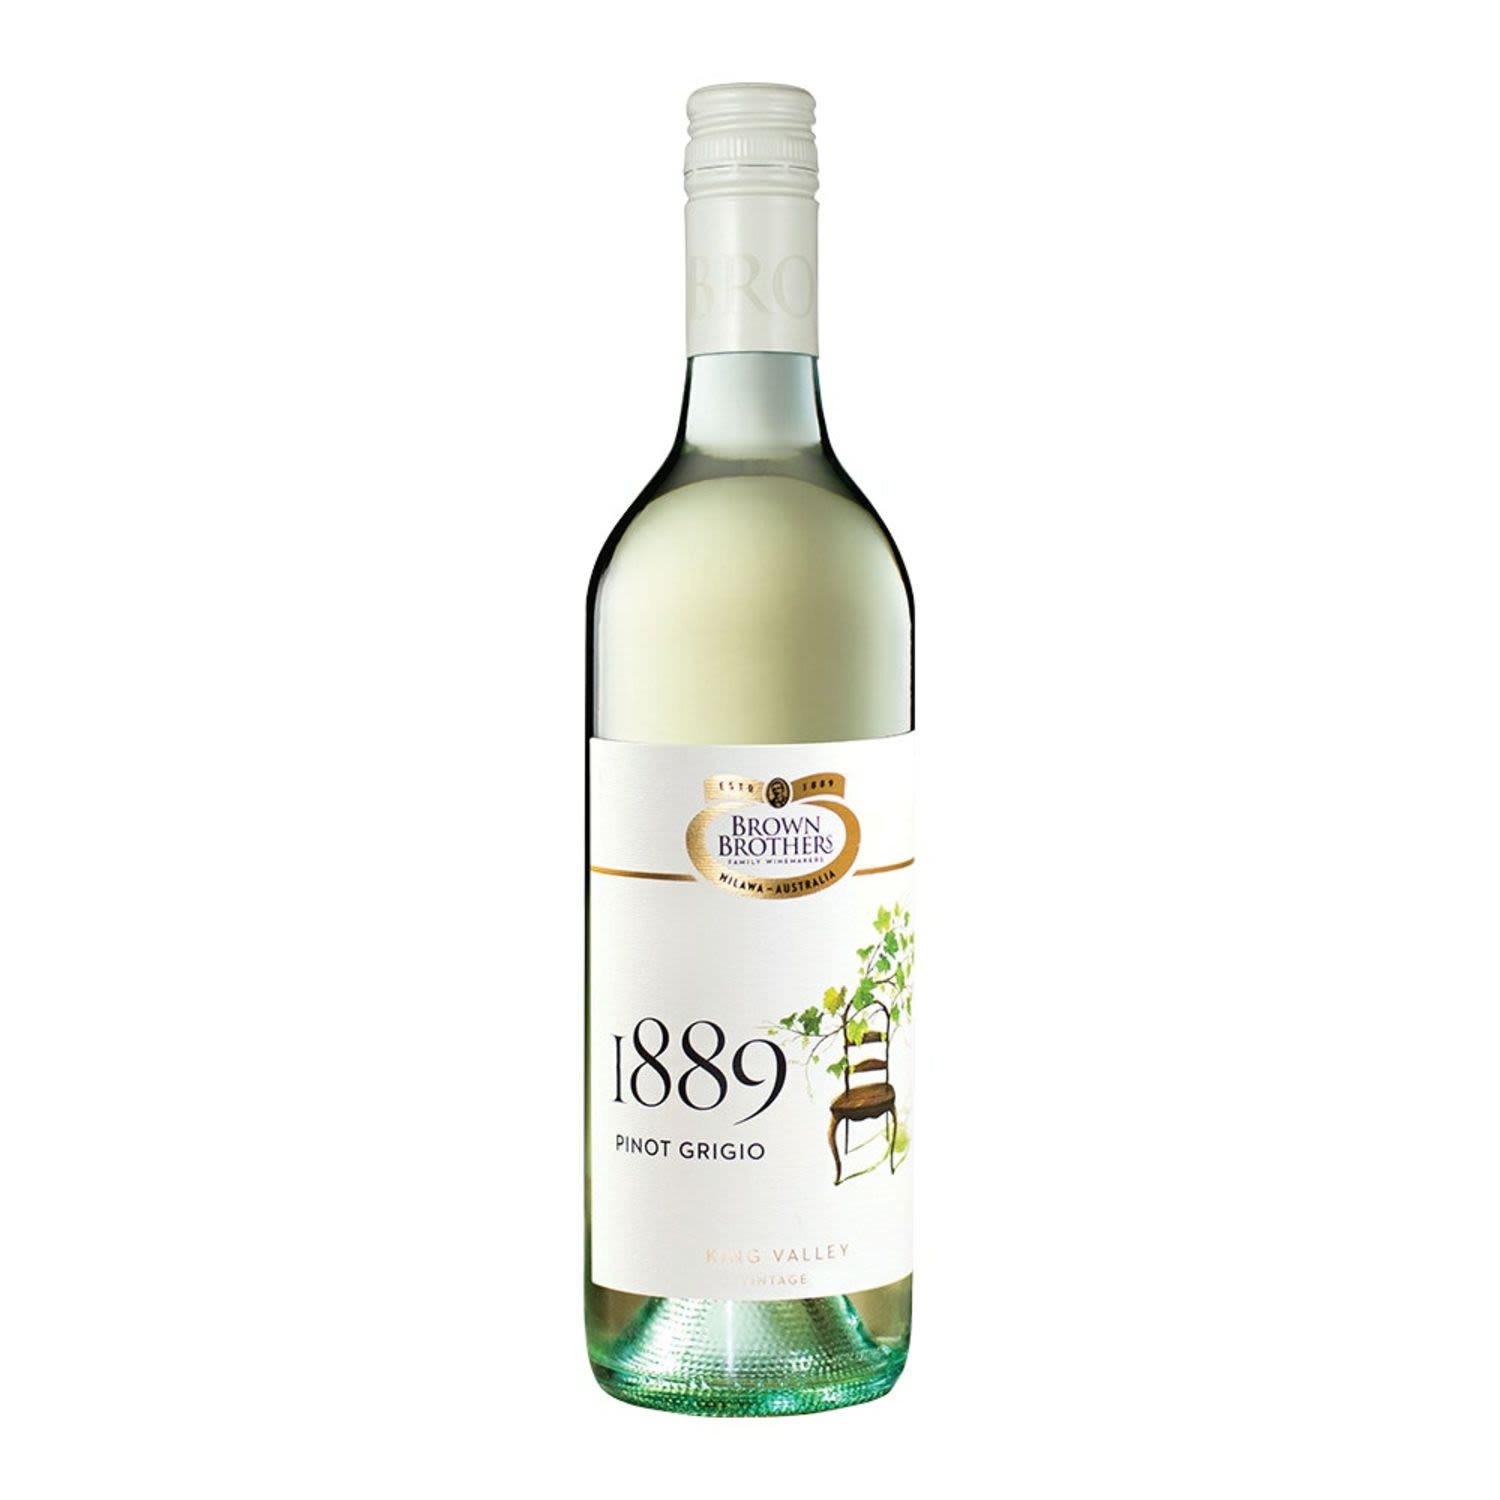 Brown Brothers 1889 Pinot Grigio 750mL Bottle